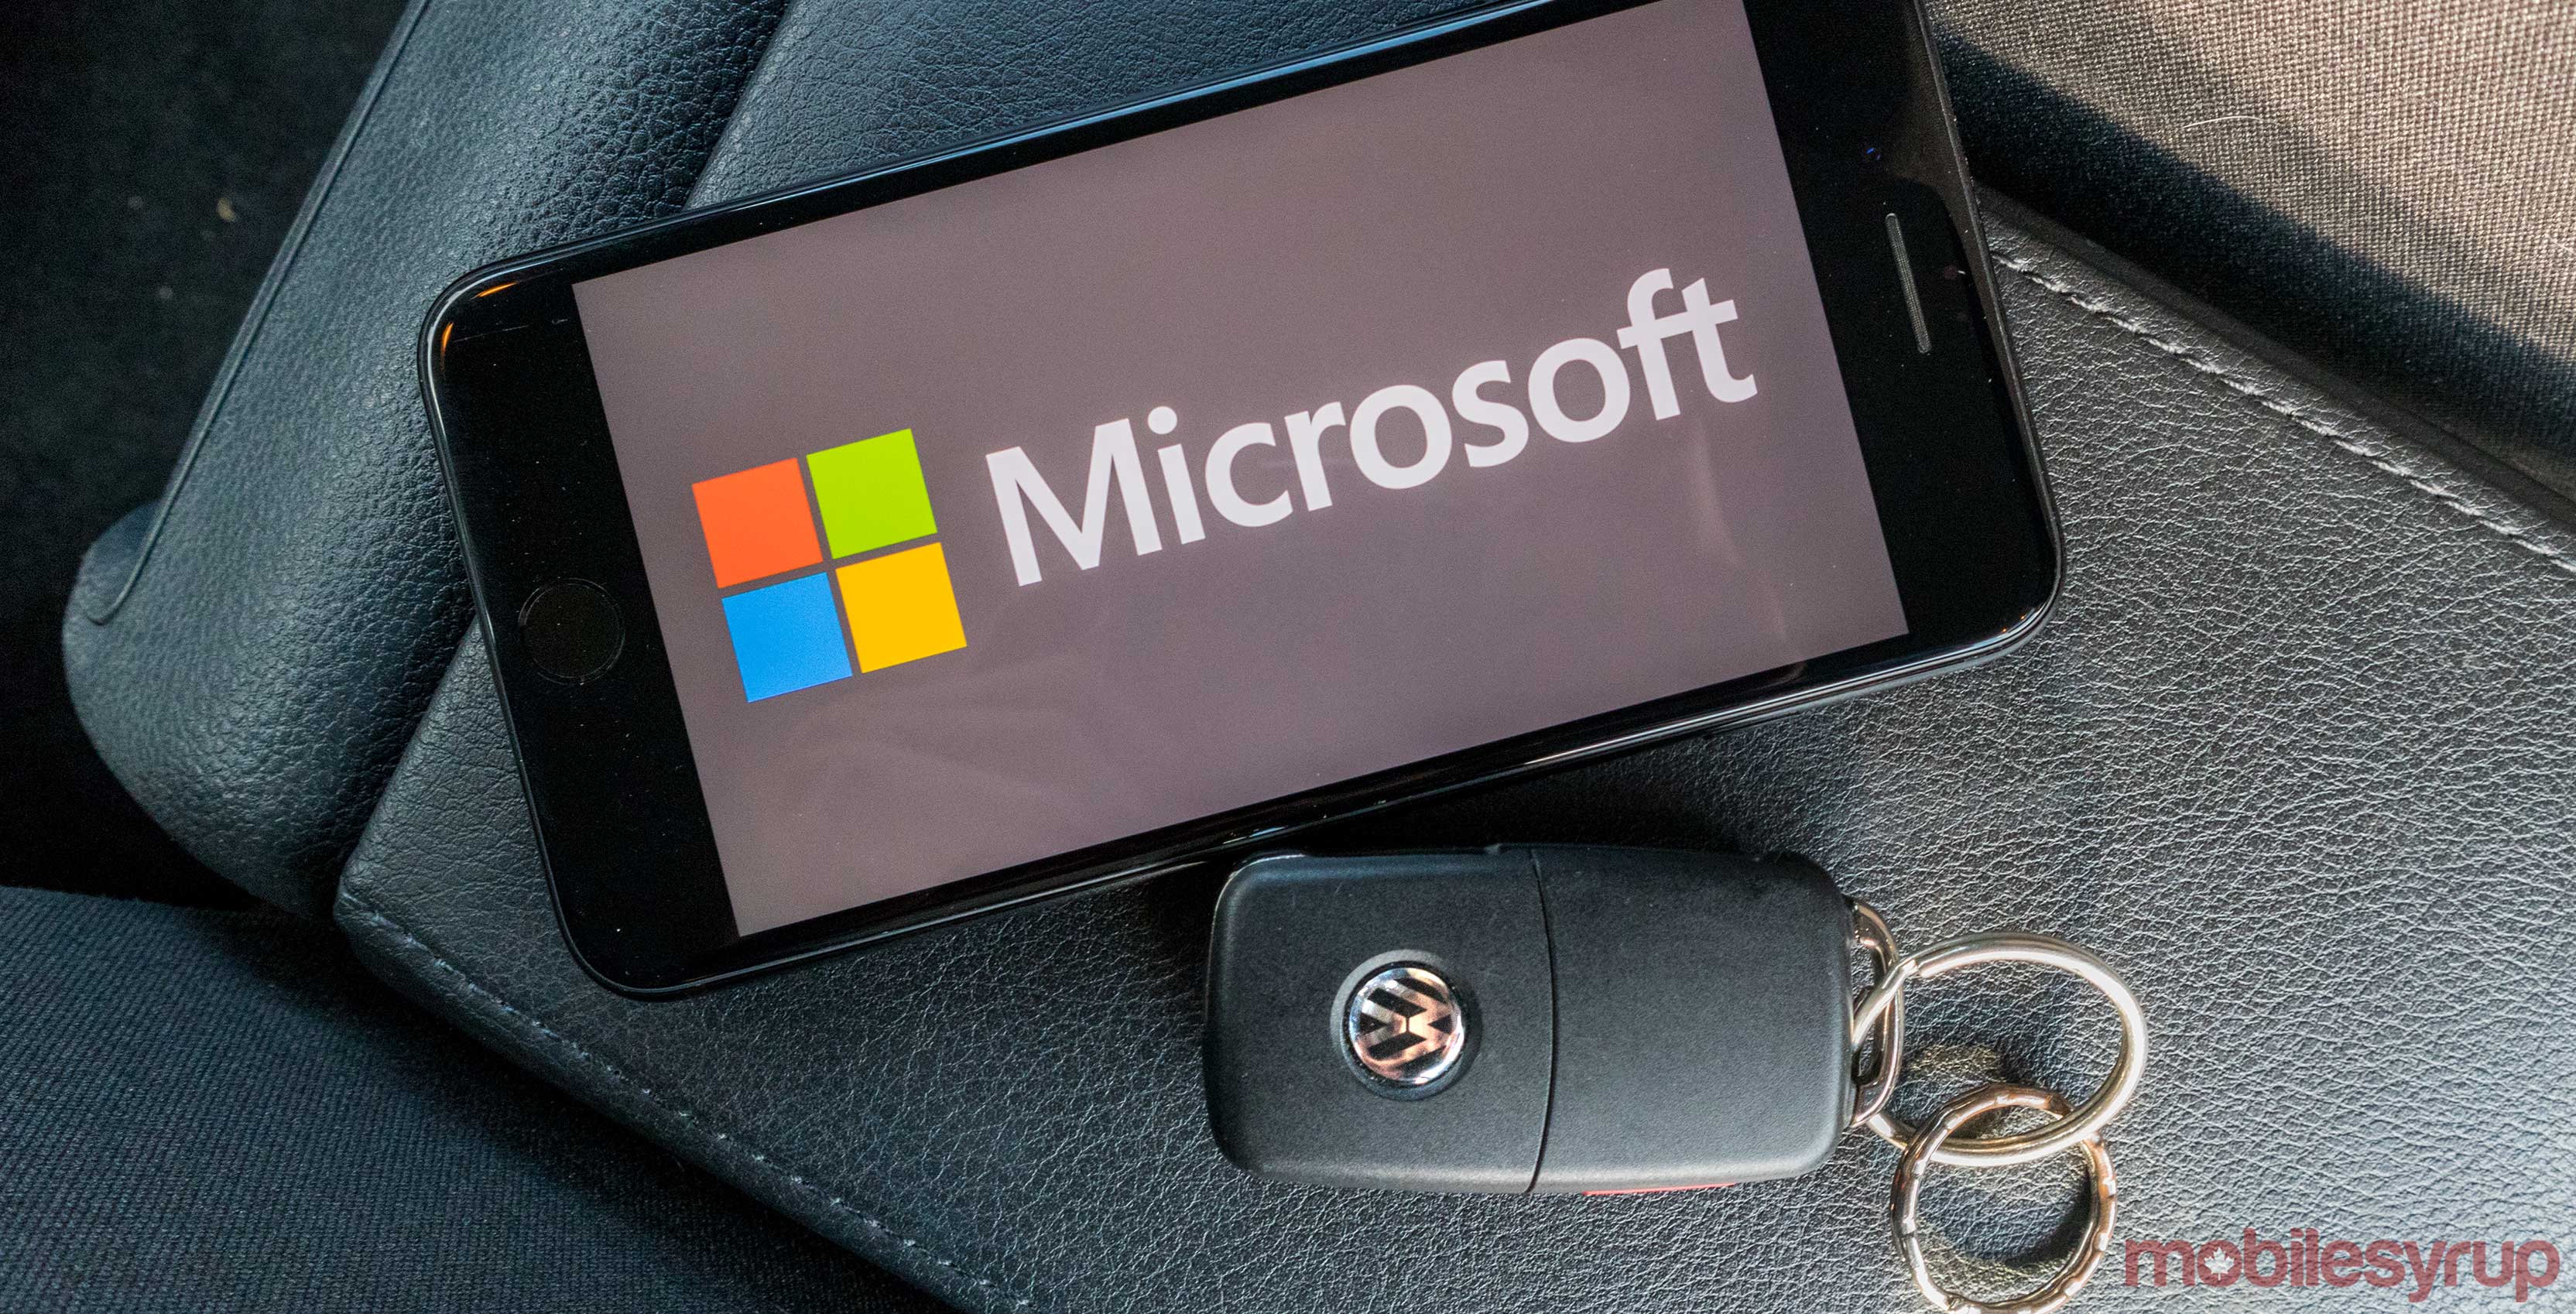 Volkswagen and Microsoft deepen partnership with new project